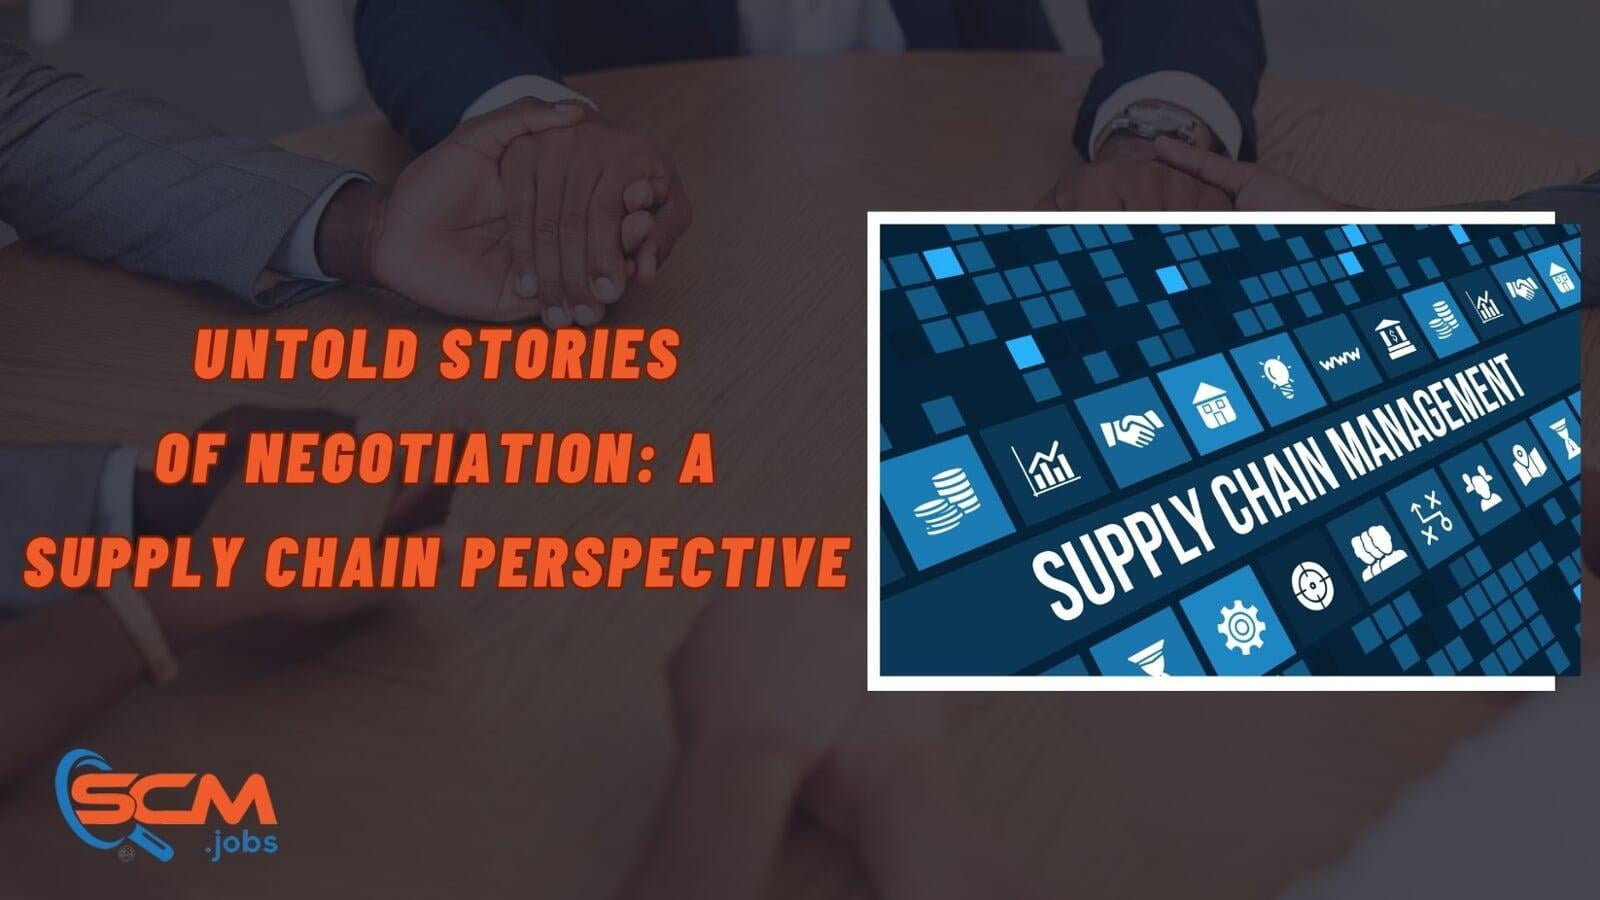 Untold Stories of Negotiation: A Supply Chain Perspective